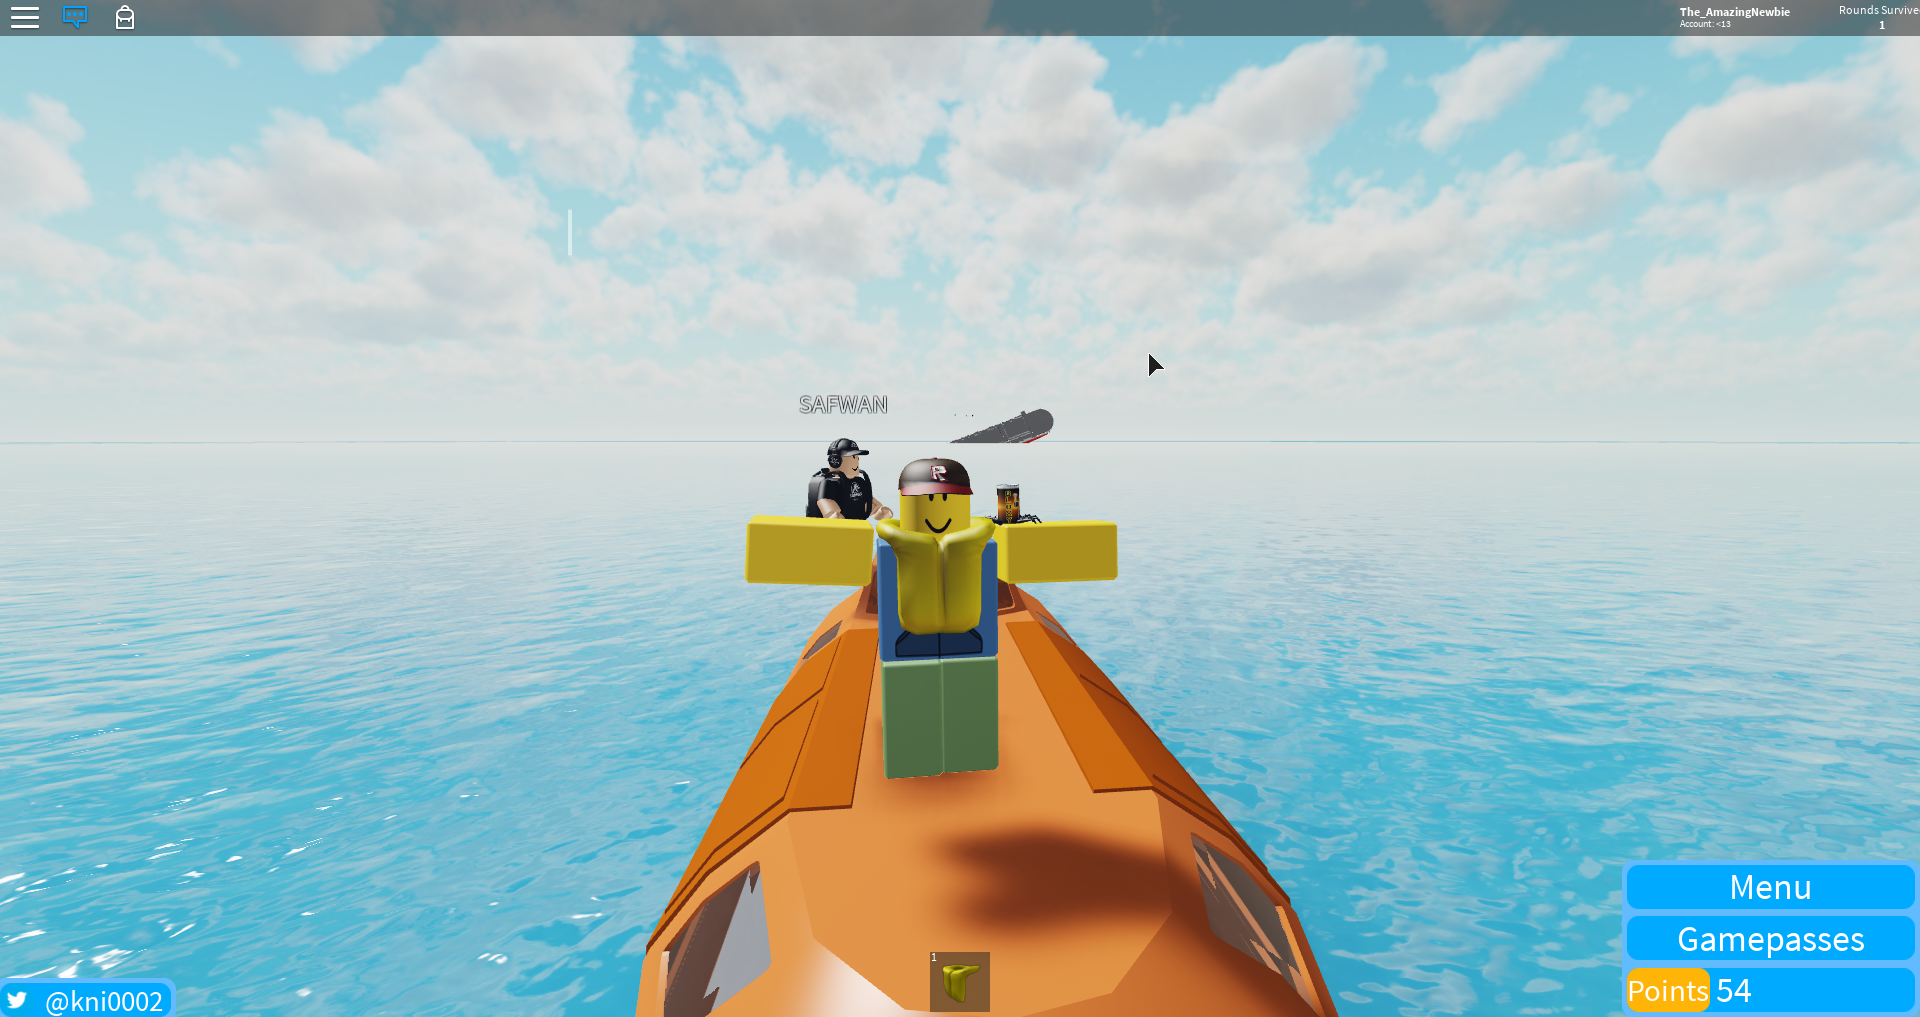 Send Me A Picture Of Your Oldest Screenshot On Roblox Fandom - lulu epic epic epic roblox